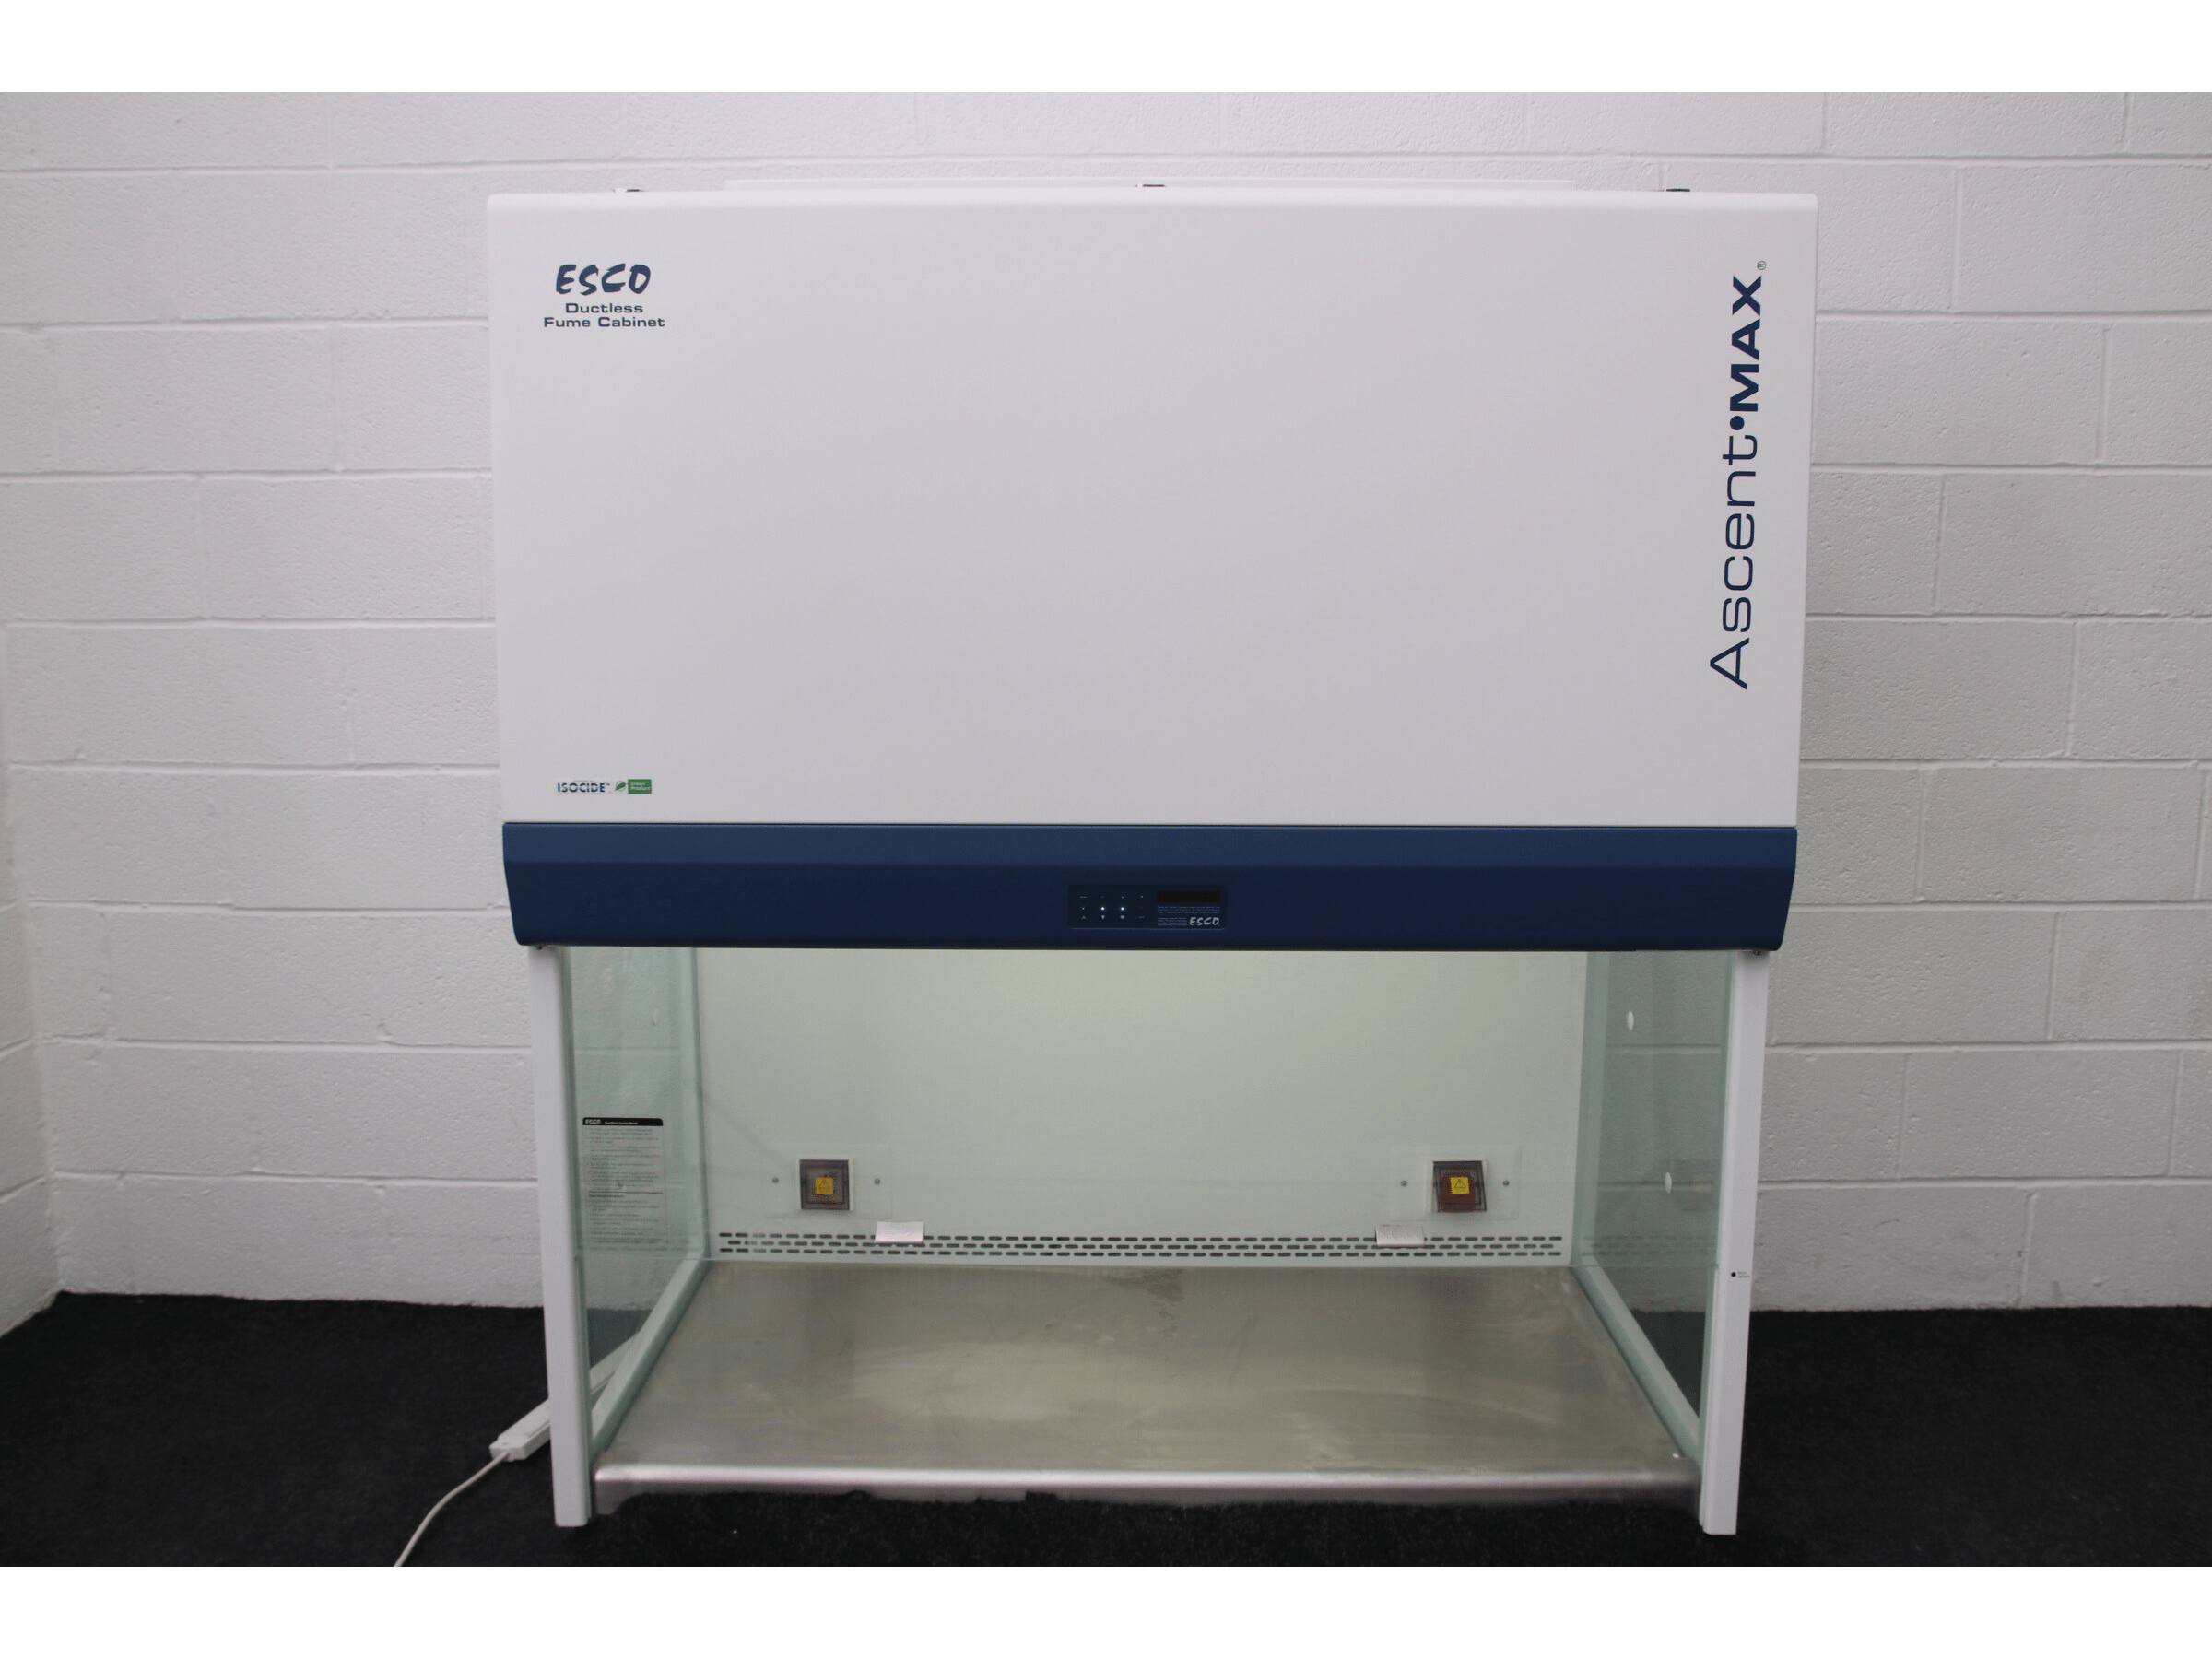 Ascent Max Esco Ductless Fume Cupboard